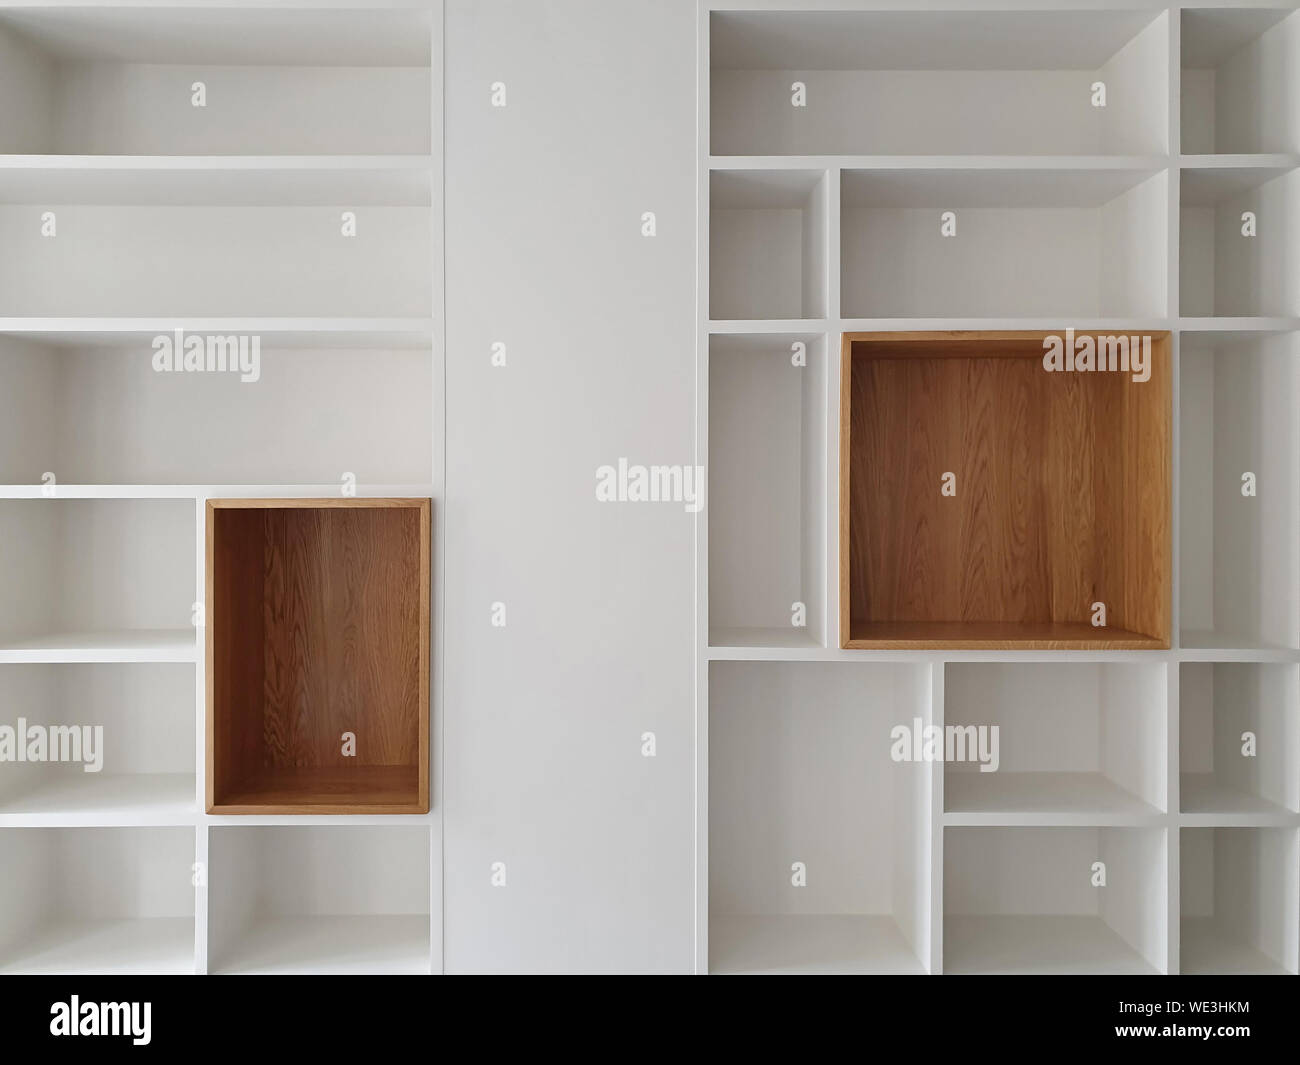 Empty closet shelves background. Modern wooden wardrobe boxes, beautiful white and brown interior design combination, abstract shape and patterns. Stock Photo